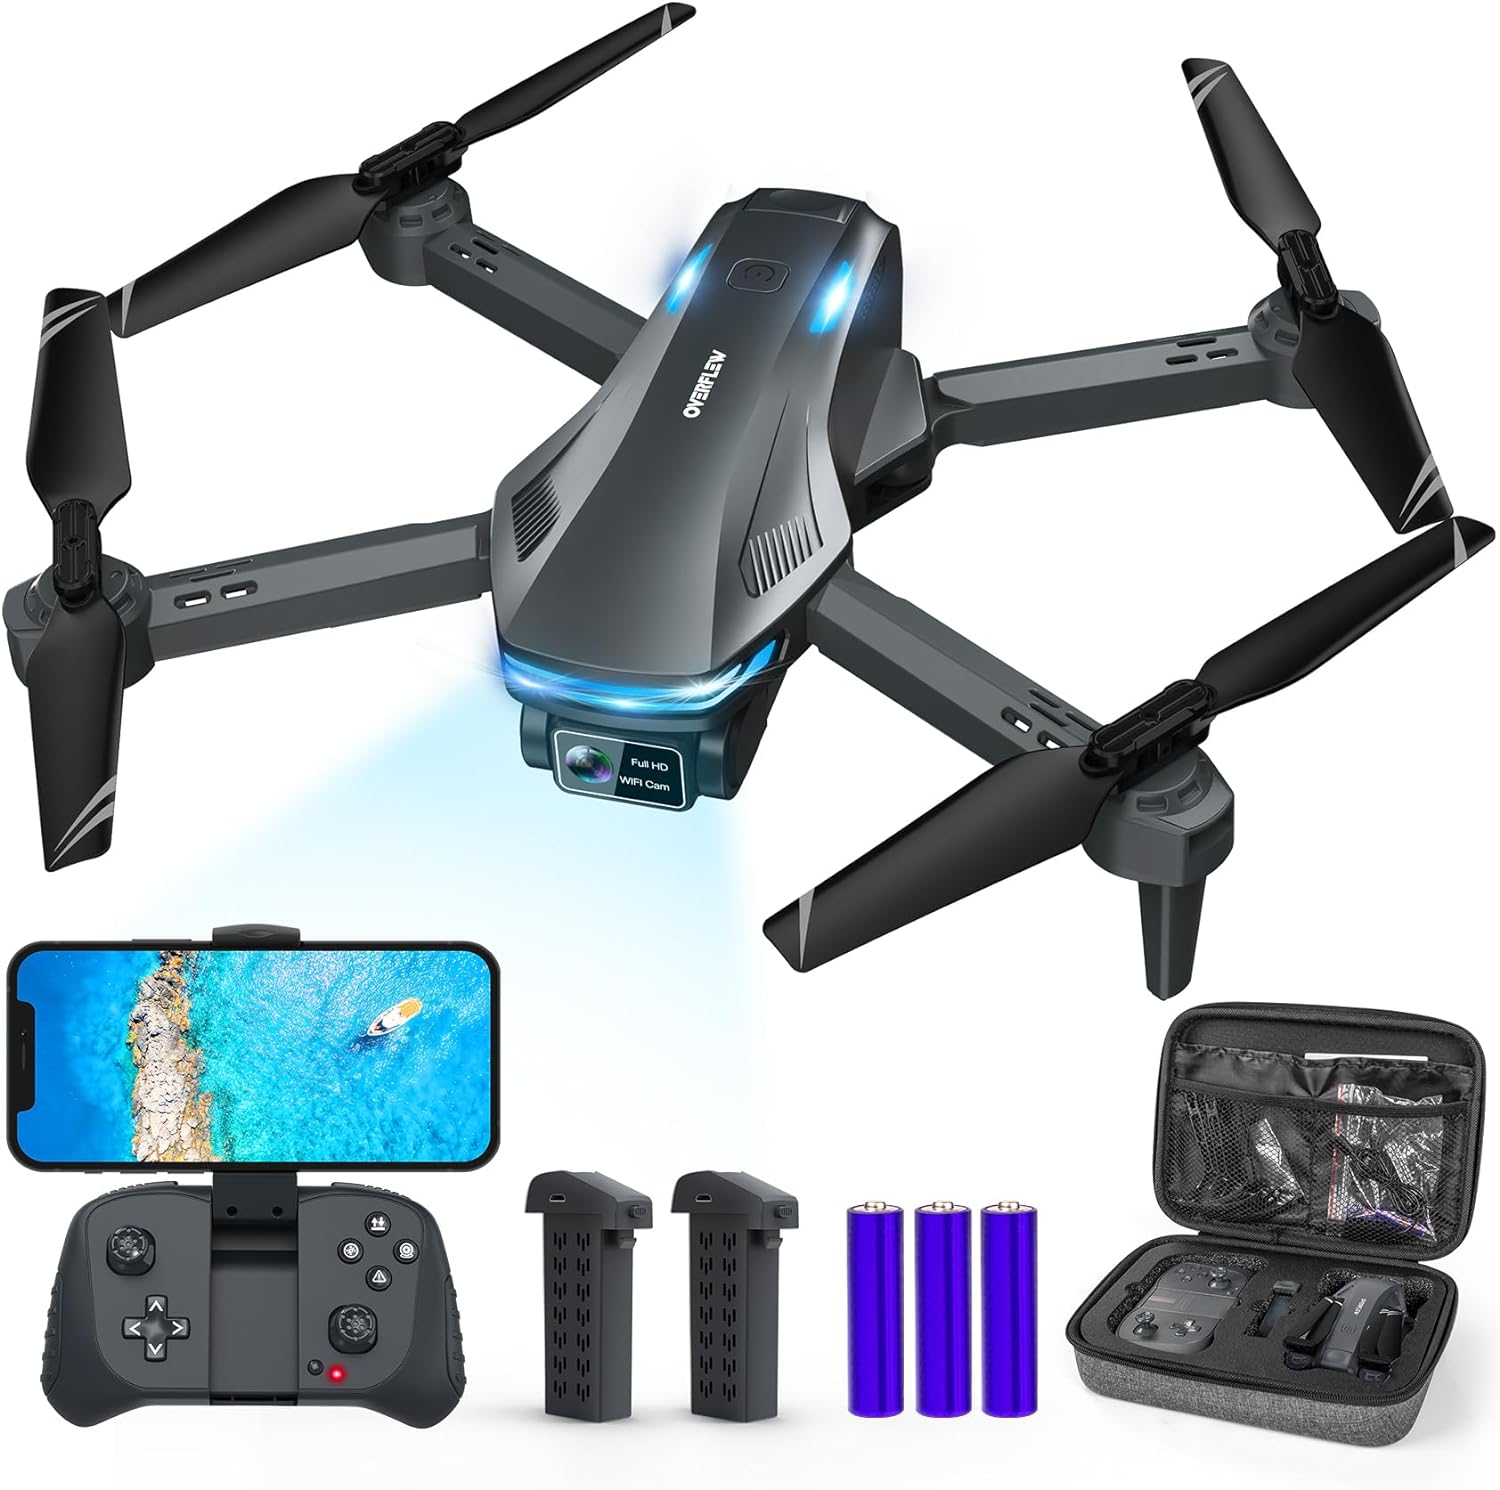 Heygelo S60 Mini Drone for Kids with LED Light, Easy to Fly for